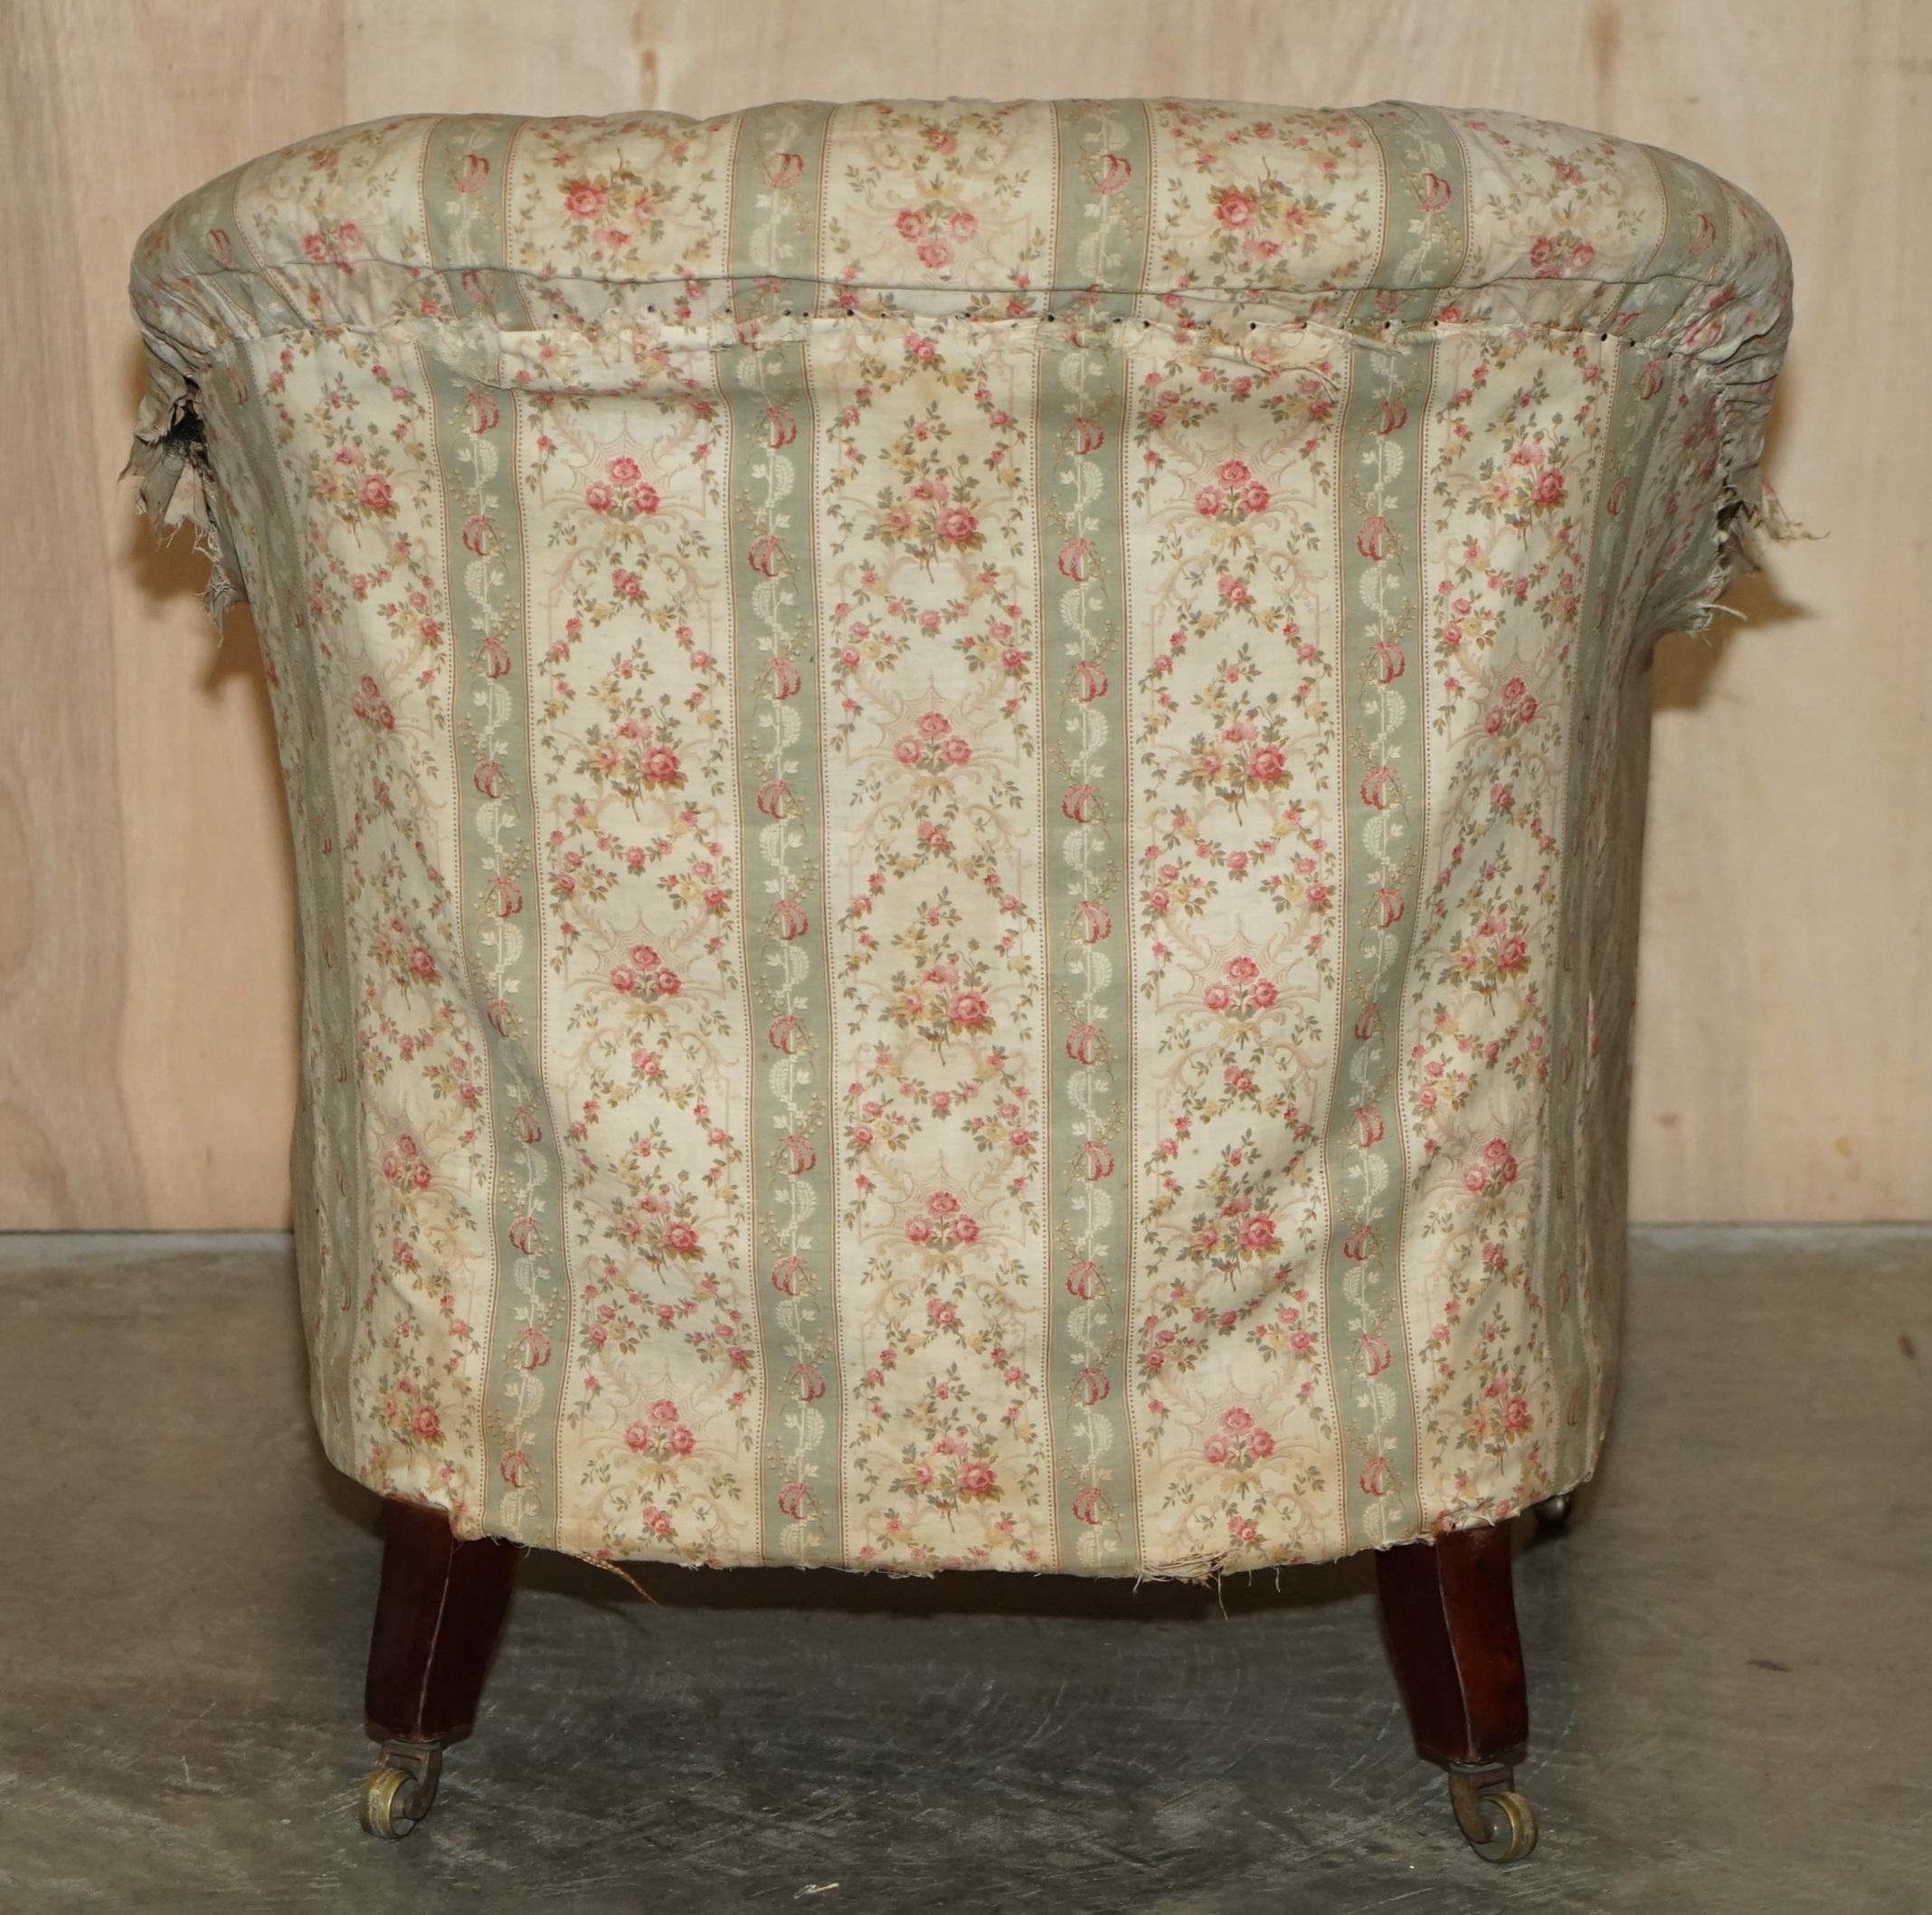 Pair of Antique Original Ticking Fabric Howard & Son's Chesterfield Armchairs For Sale 10